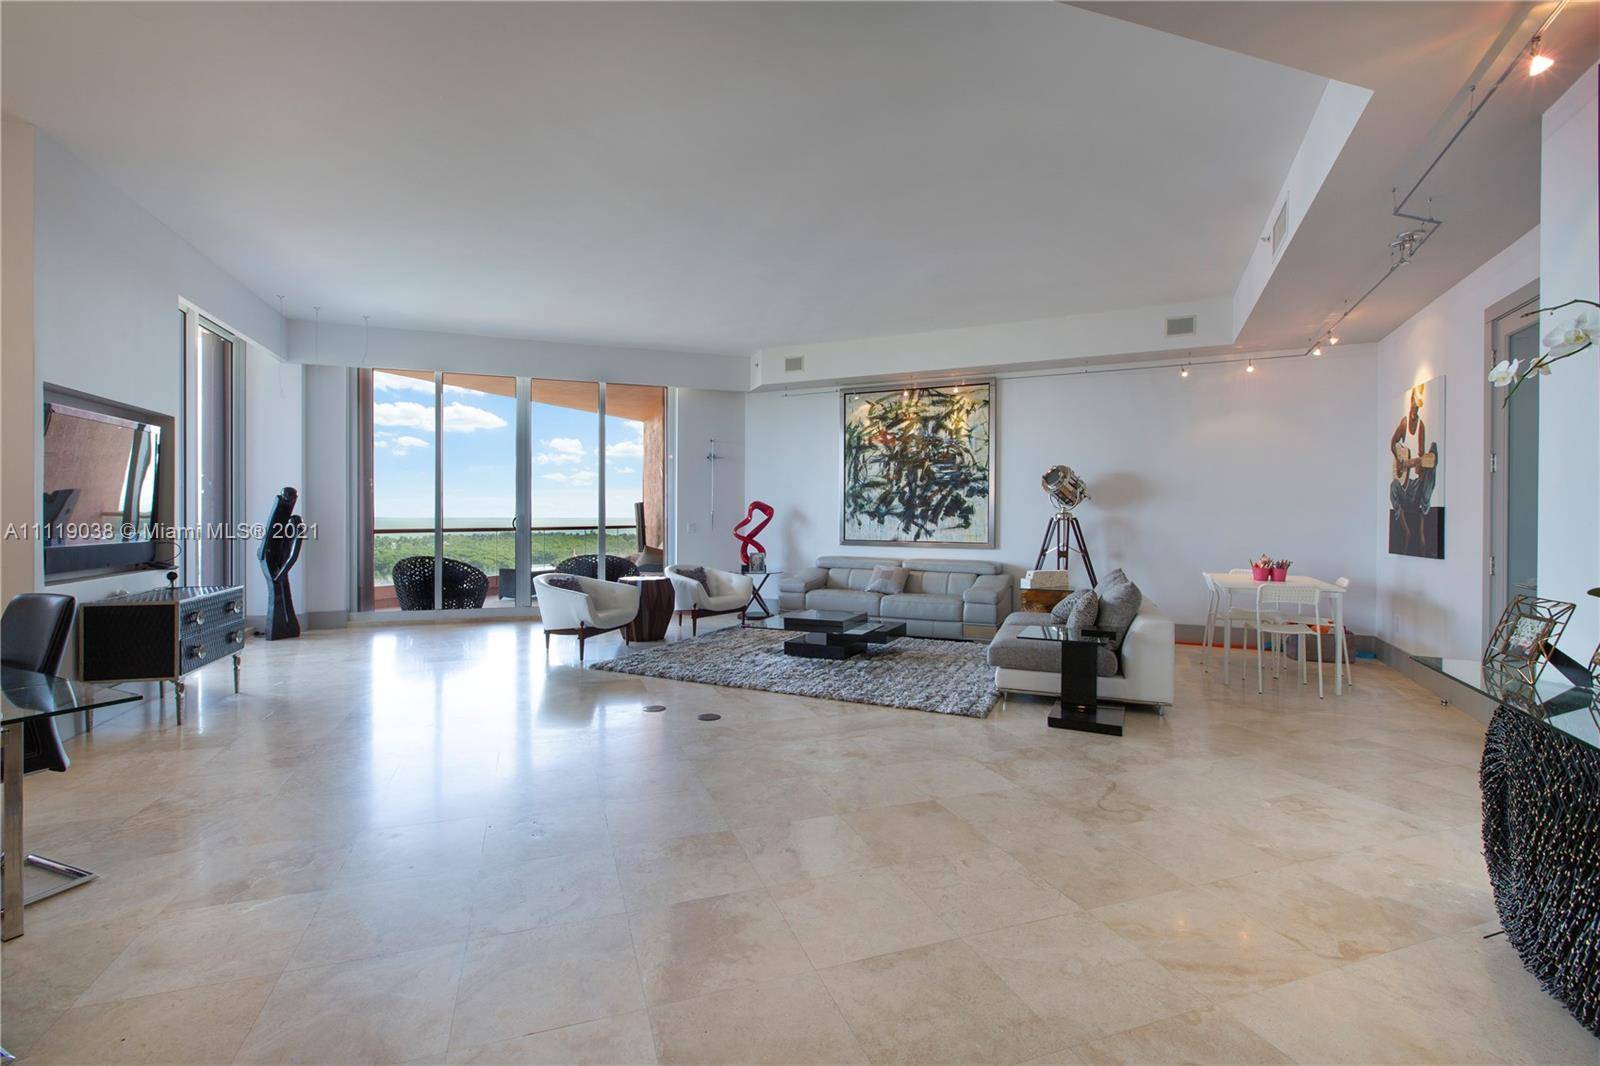 Spectacular Penthouse completely remodeled and upgraded with top of the line finishes.